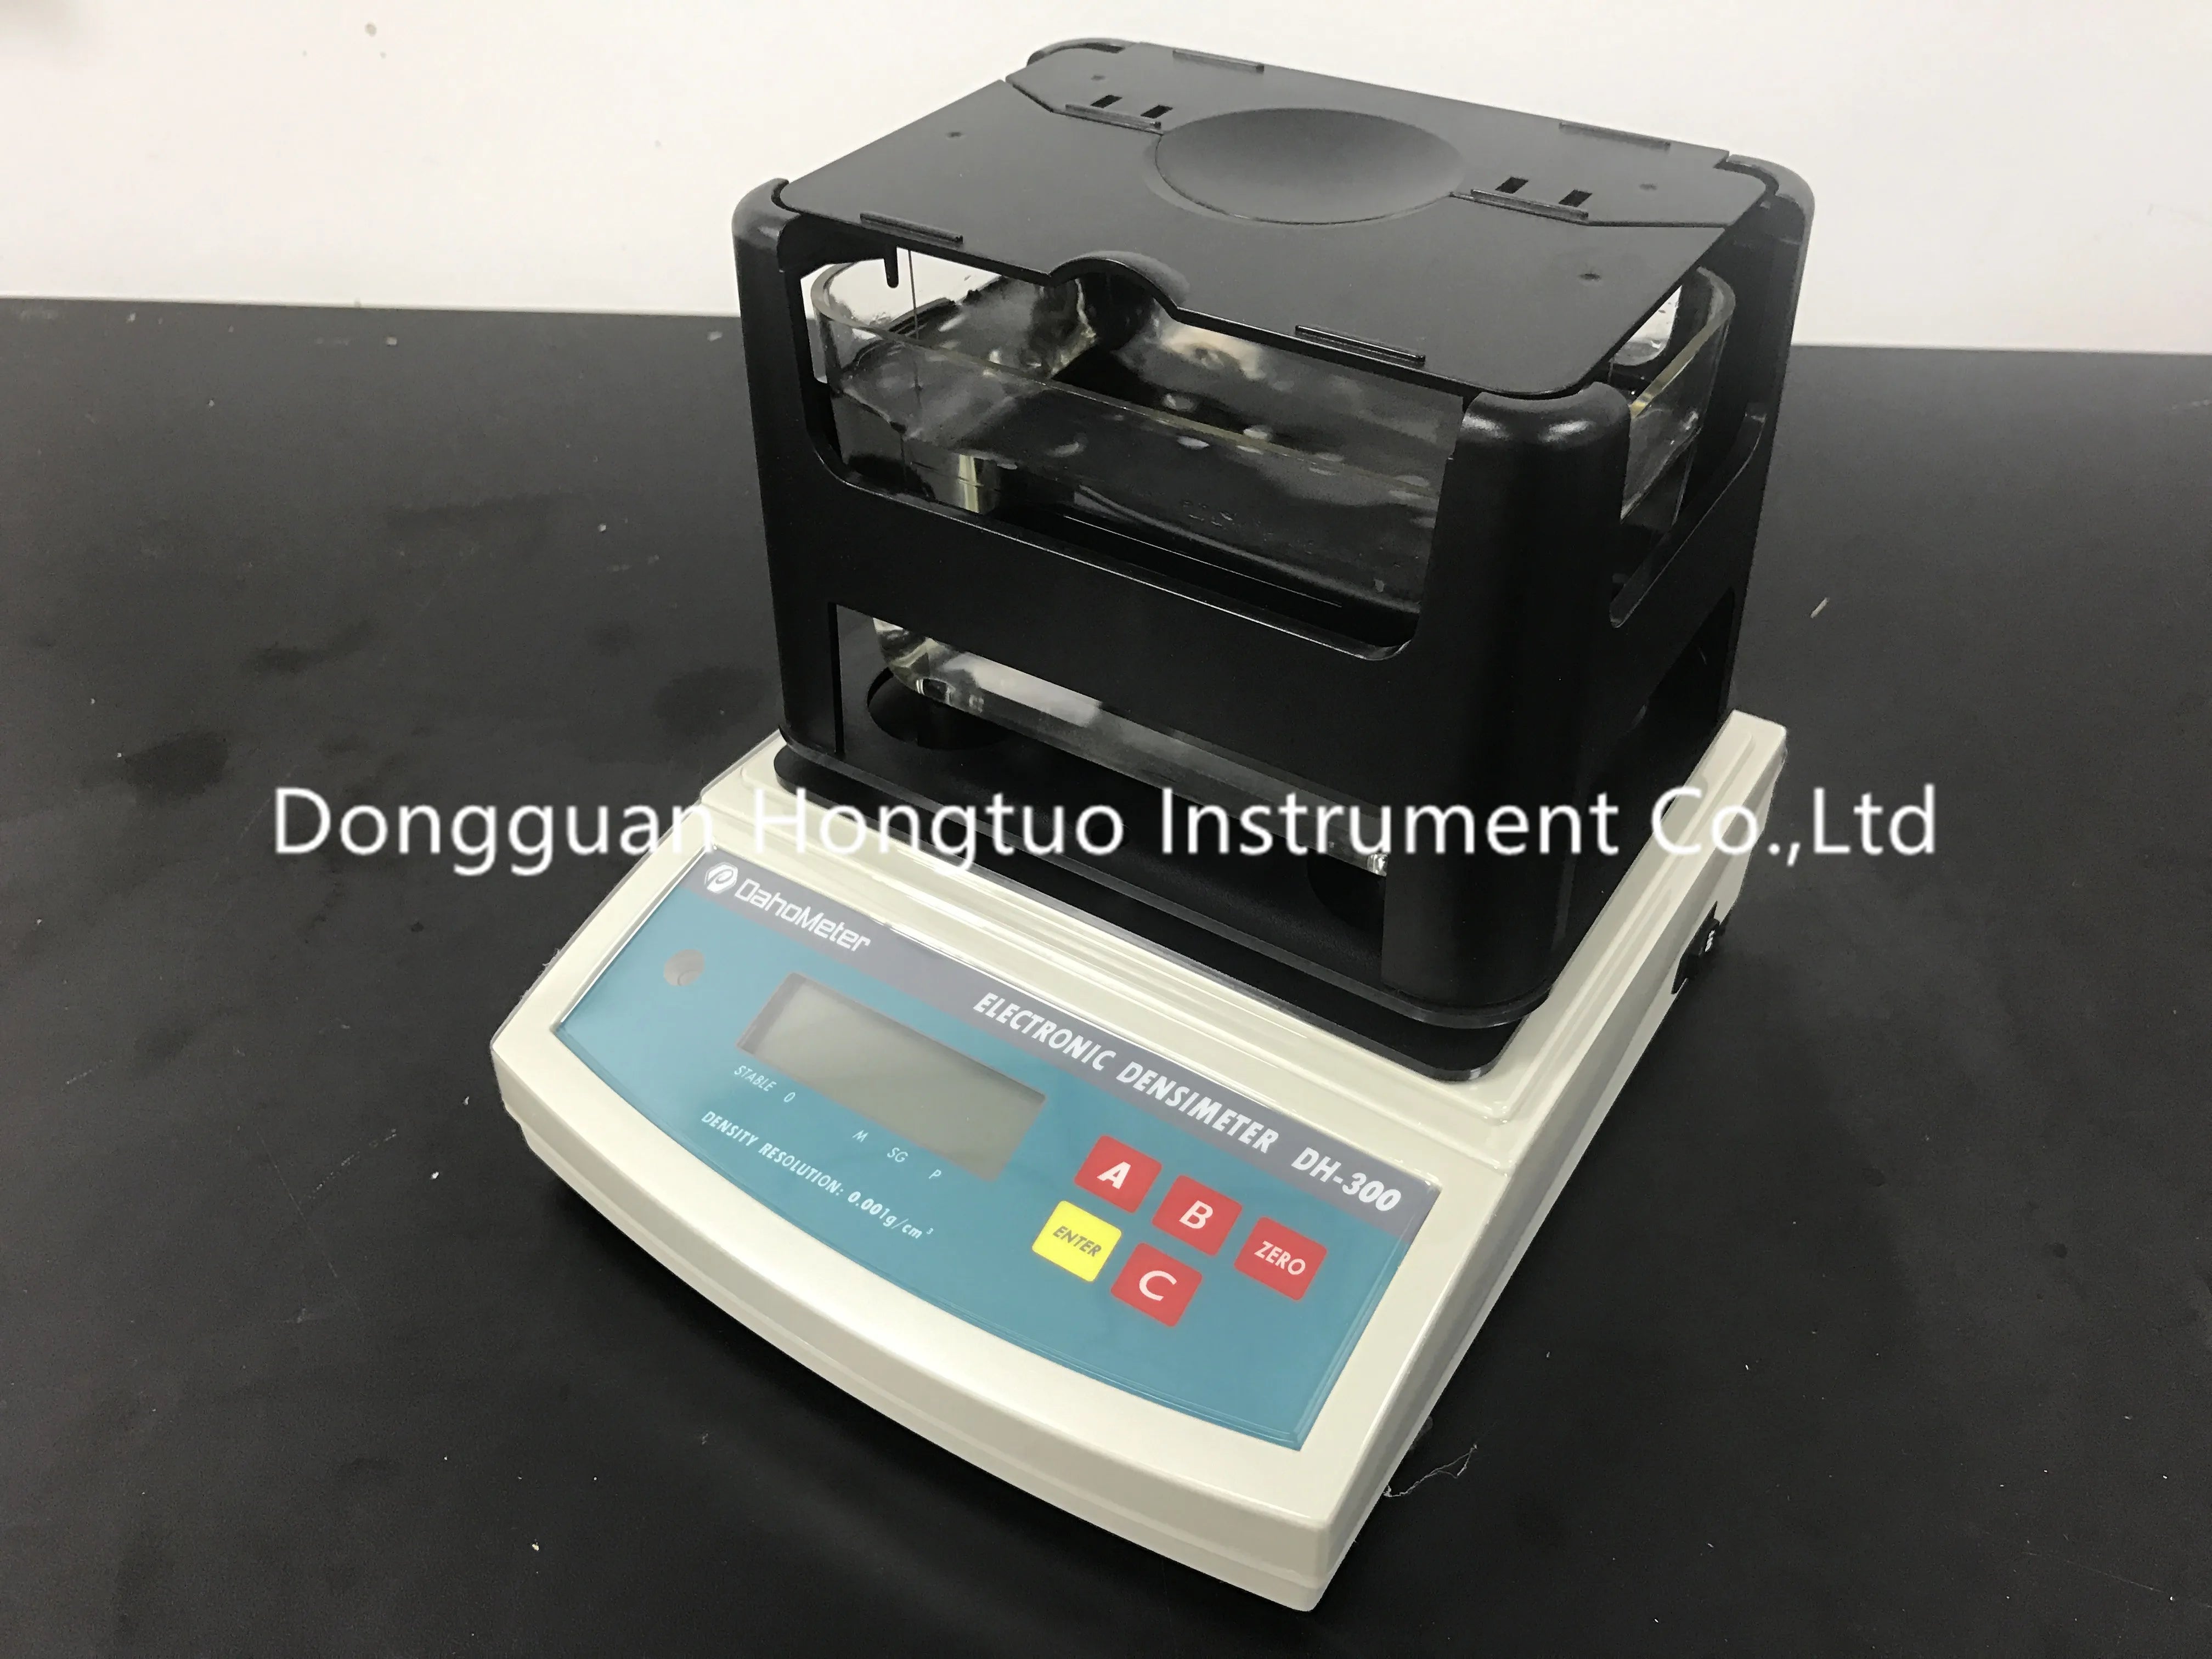 DH-900 Electronic Digital Solid Density Meter Price, Densitometer Specific Gravity Balance Solid Tester